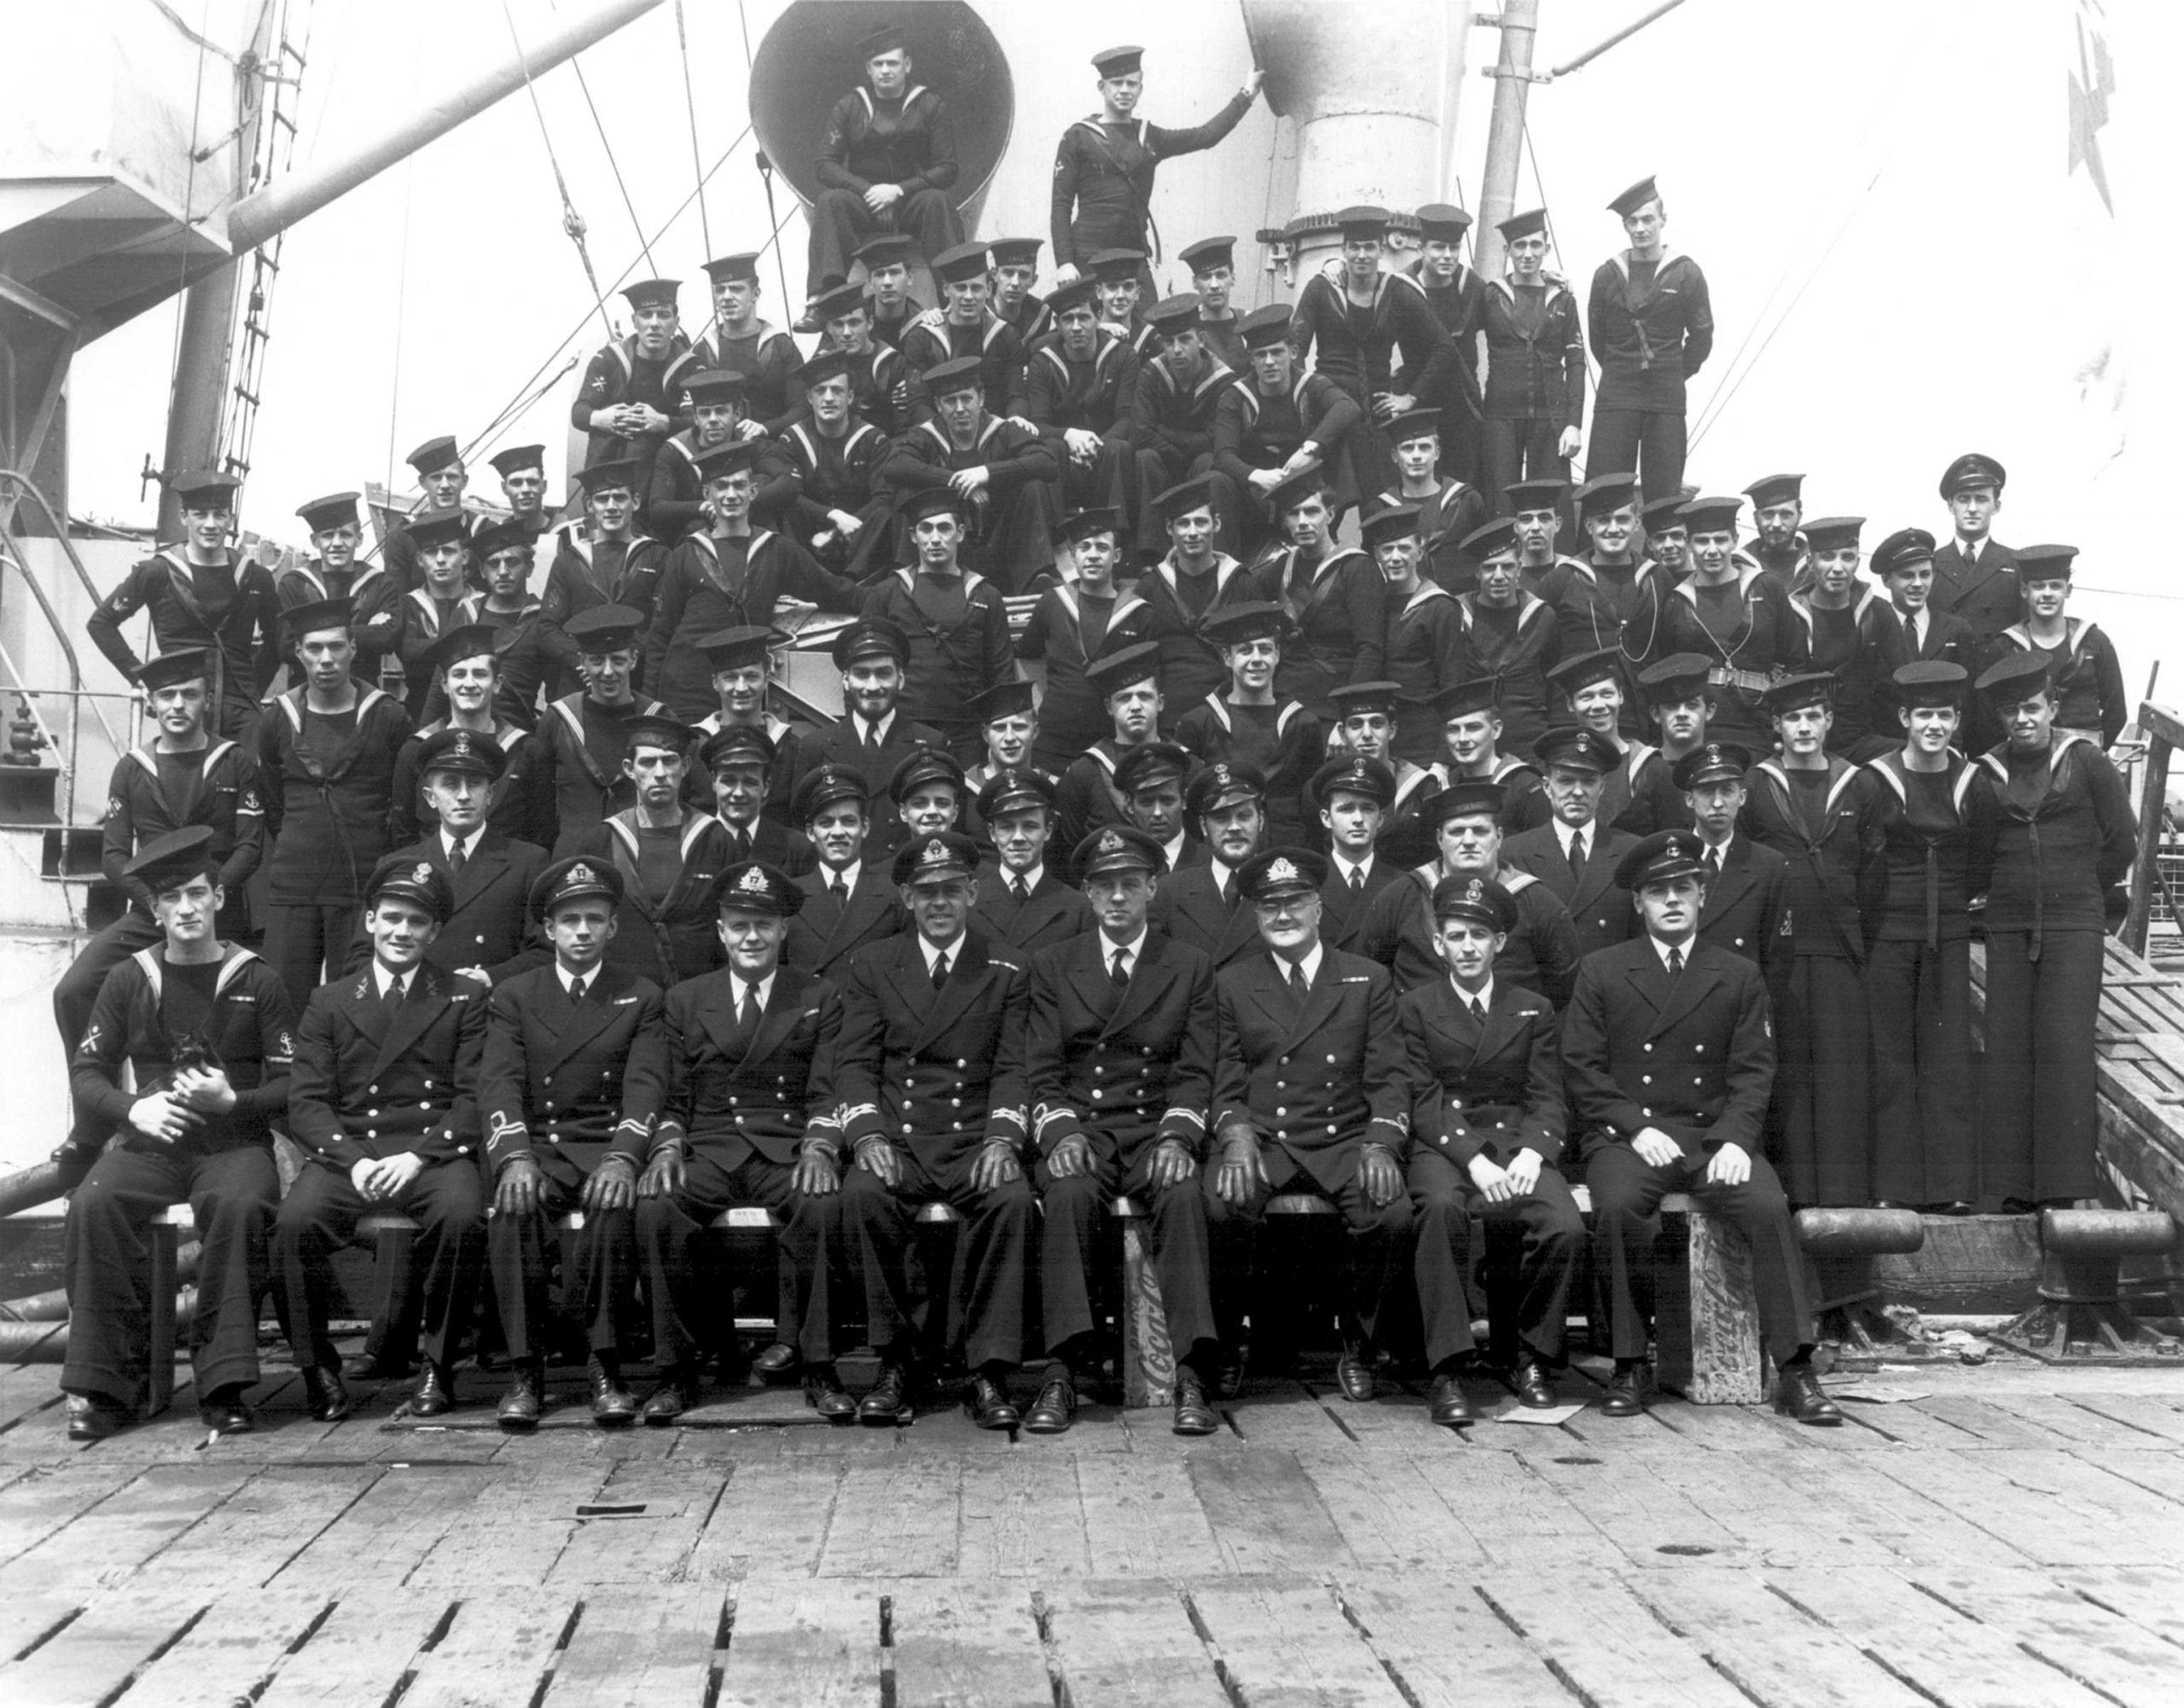 Photo of the crew of the Canadian Chilliwack Corvette